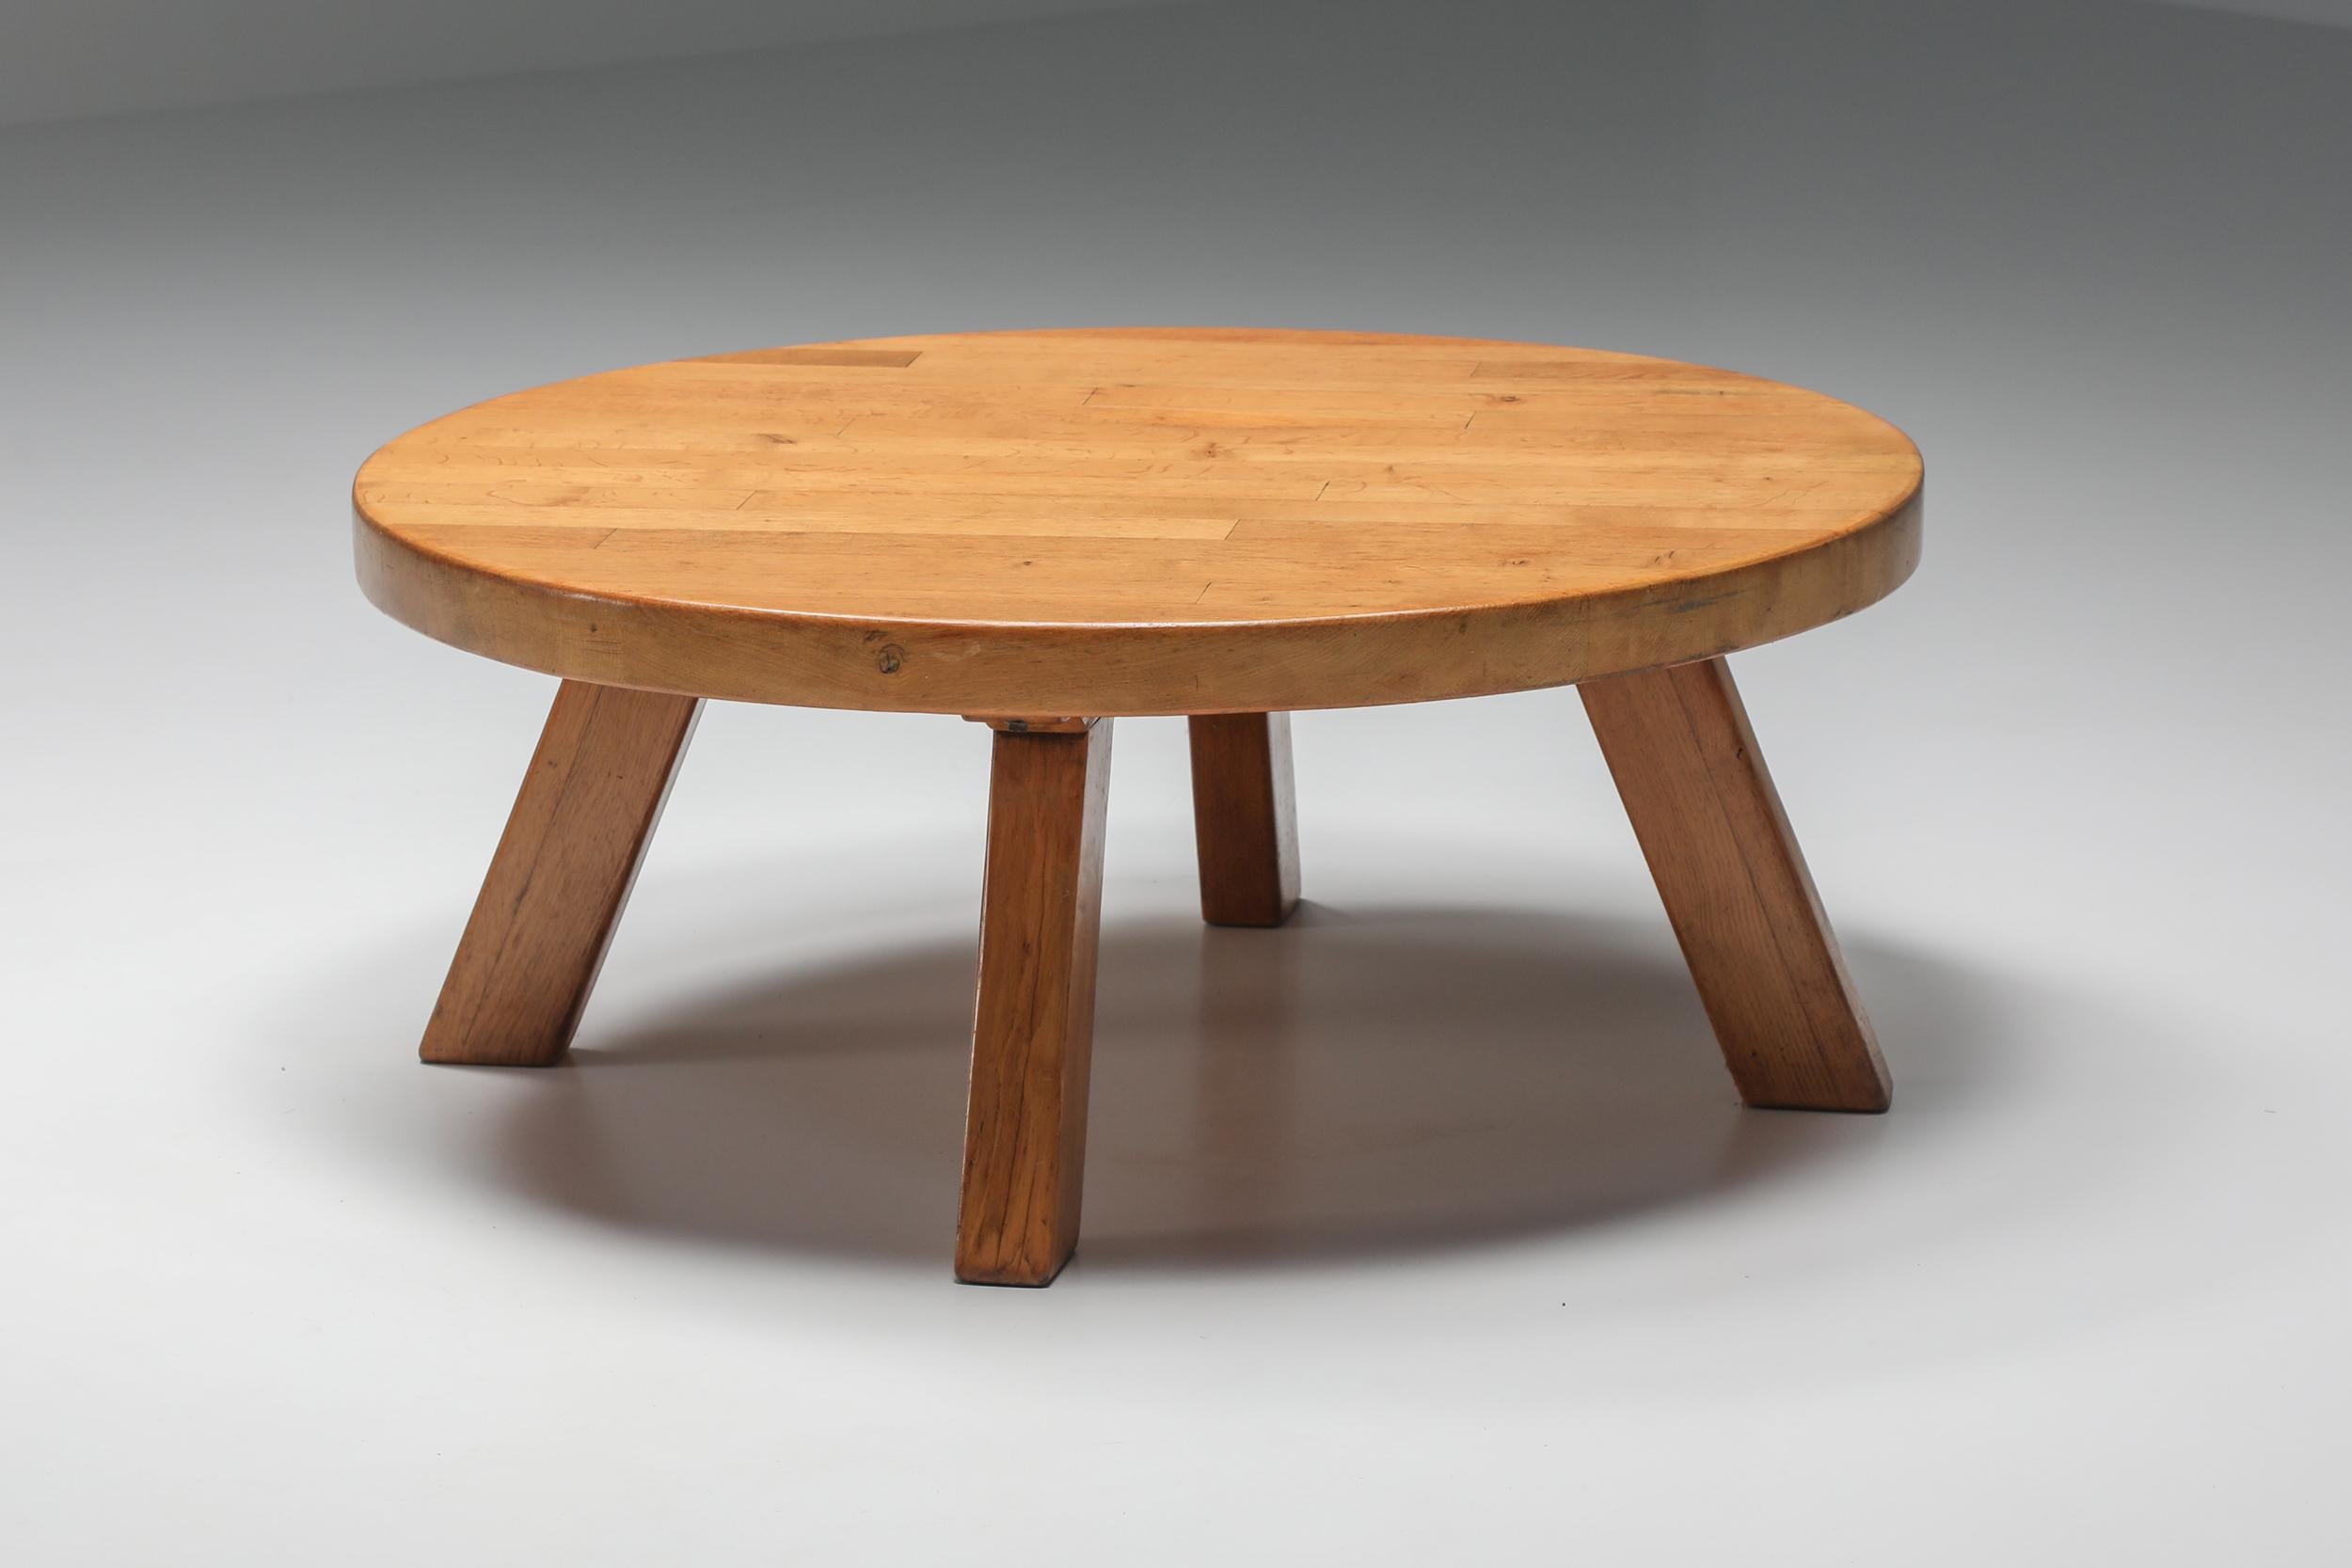 Charlotte Perriand style; round coffee table; 1960's; French Modernism; Minimalist; Pinewood; Japanese Influence; Side Table

Coffee table with an elegant round tabletop in the style of Charlotte Perriand's. Sleek design in pine in reference to